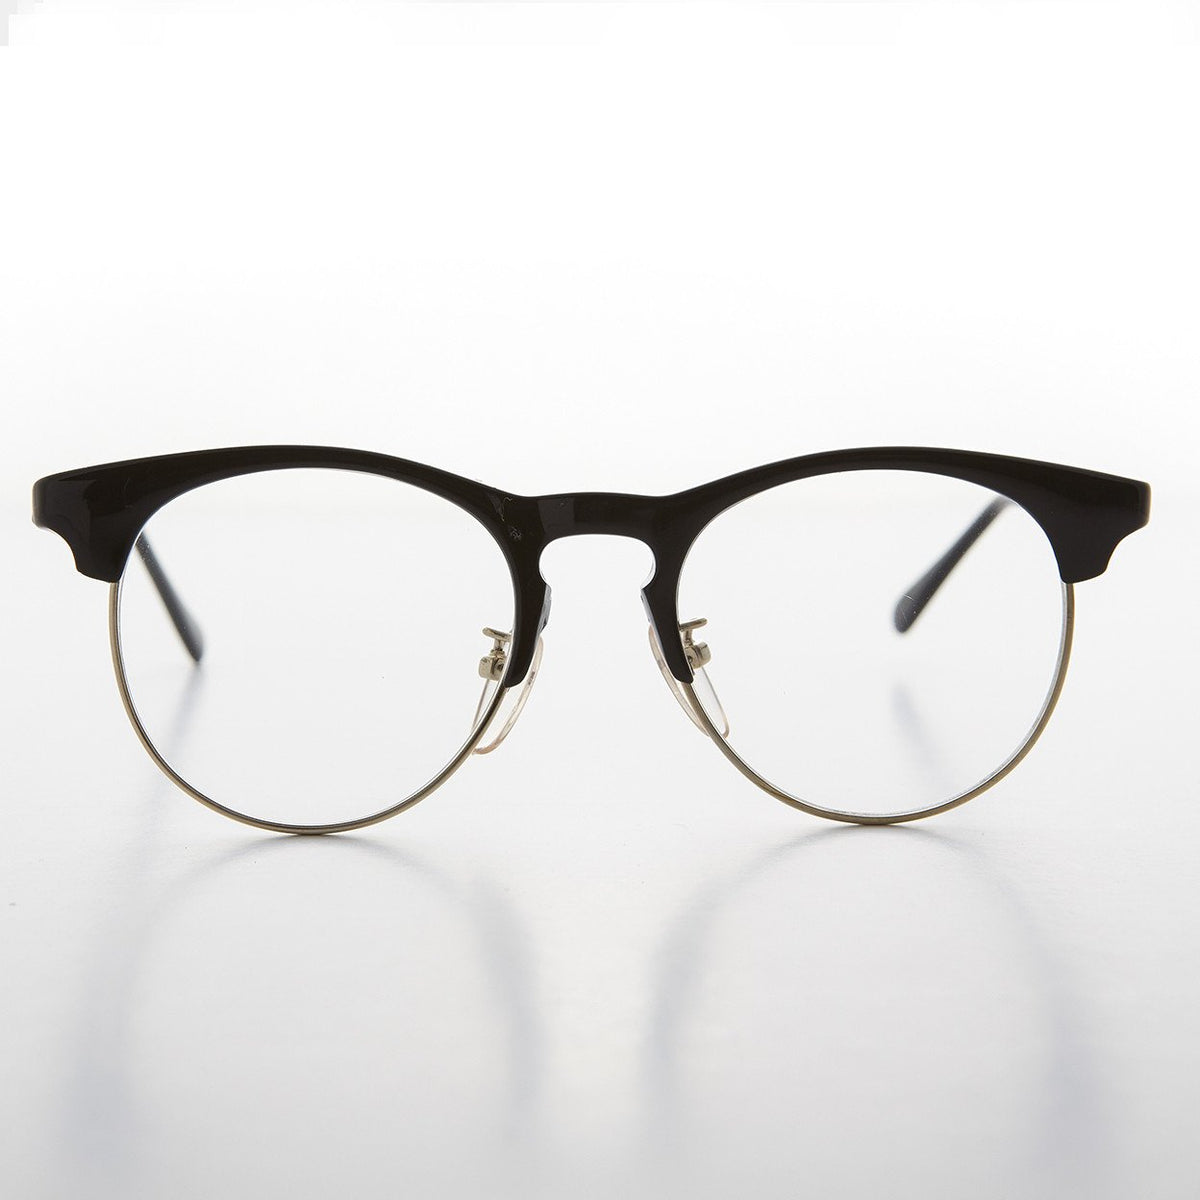 Sunglass Museum Clear Frame Hipster Clear Lens Vintage Glasses - Sanders - Clear